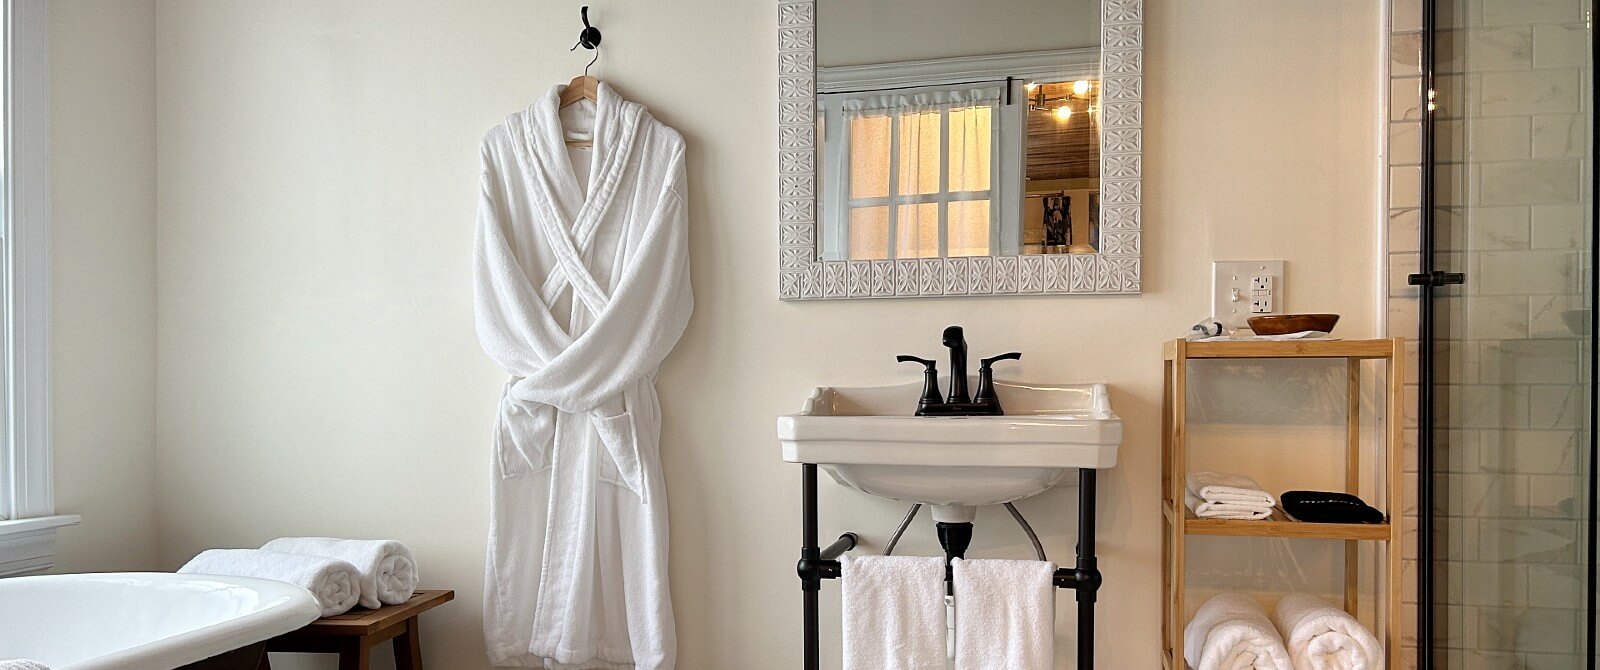 Bathroom with pedestal sink, clawfoot tub, hanging robe and wood shelf with towels